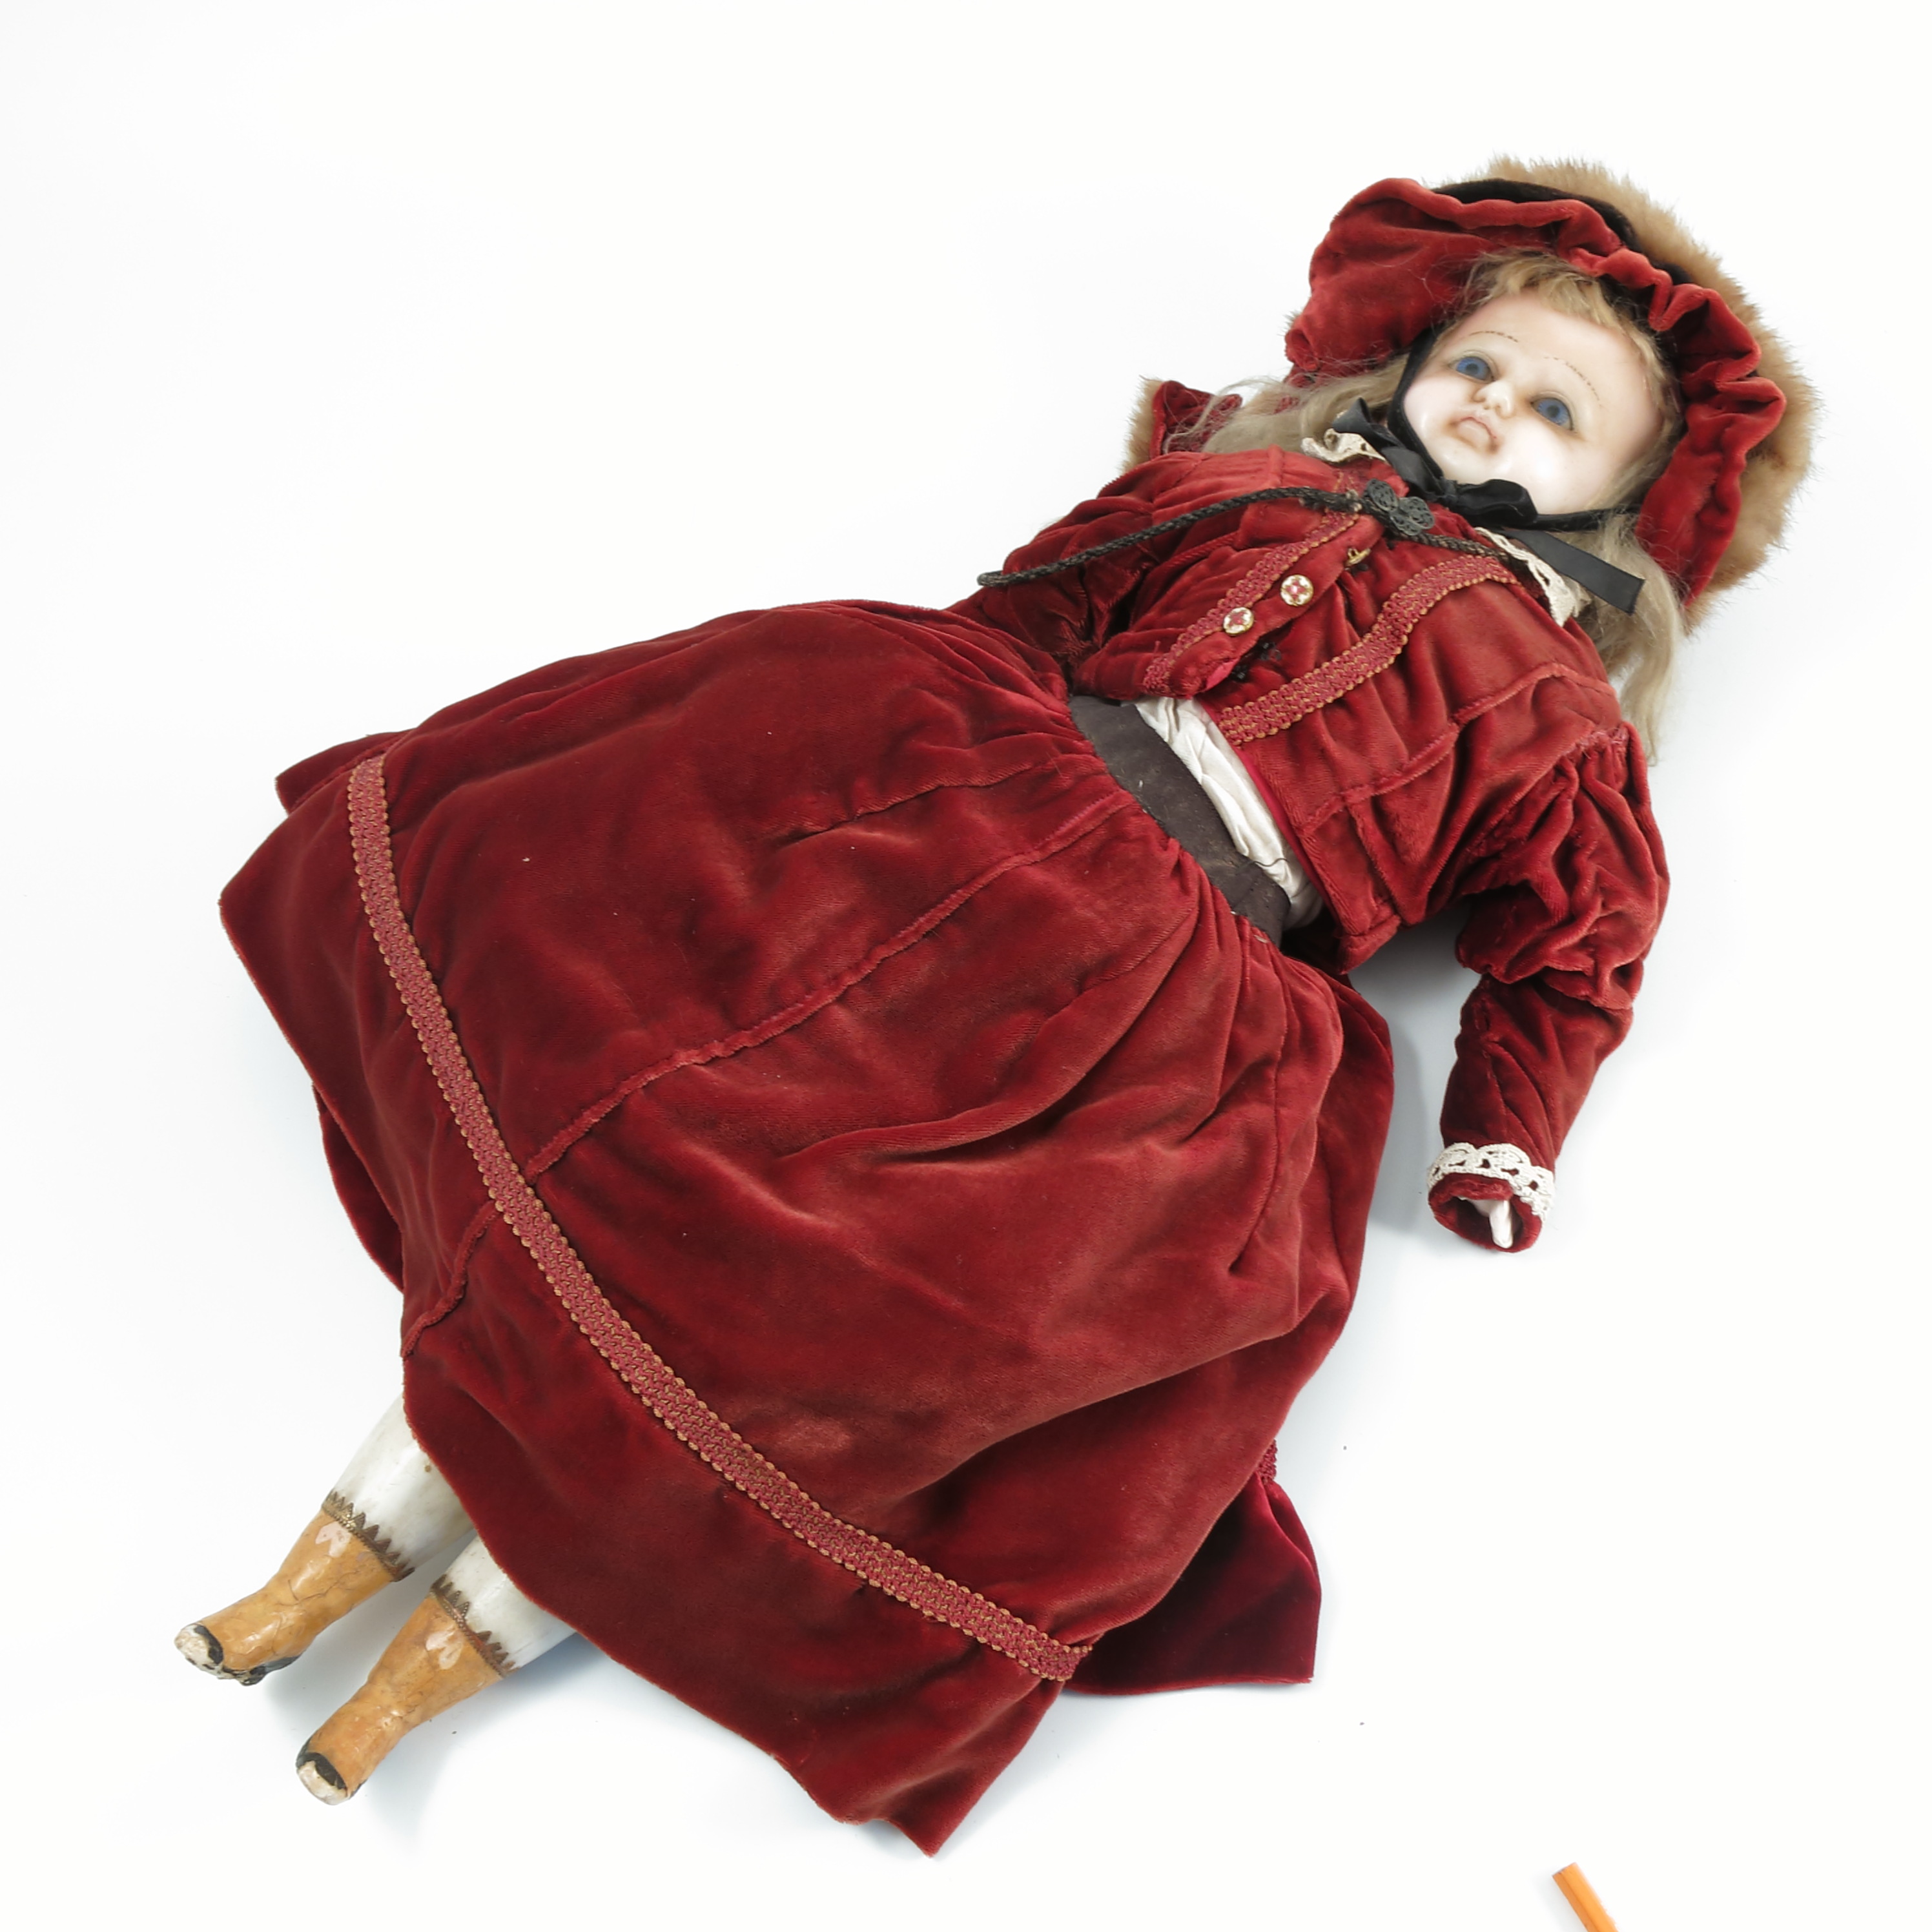 A 19th century wax doll, of a girl, the blue eyed girl dressed with 19th century style clothes of